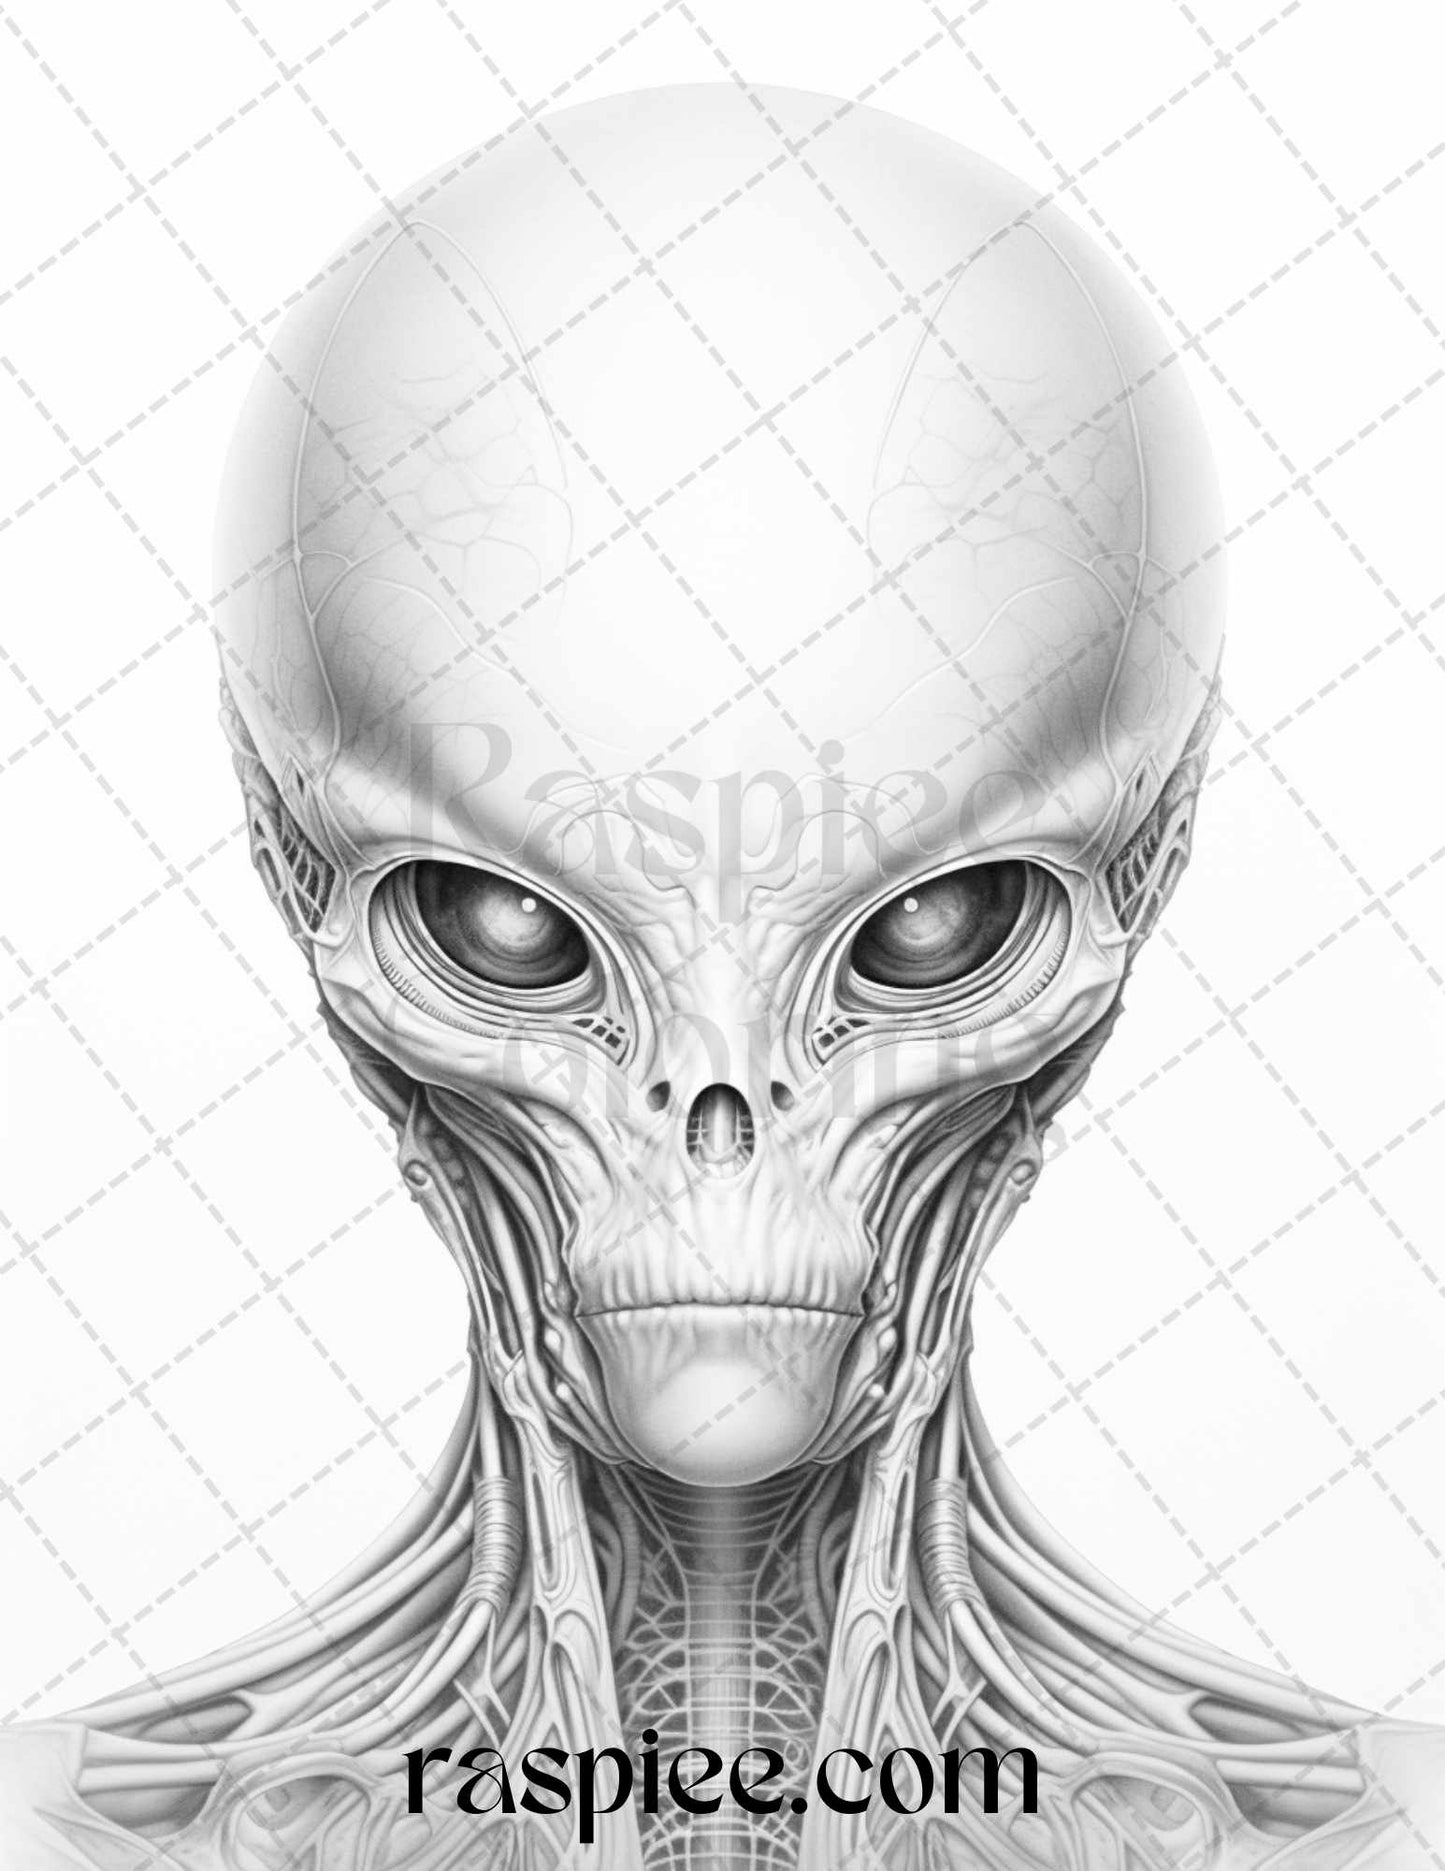 65 Alien Portrait Grayscale Coloring Pages for Adults, Printable PDF File Instant Download